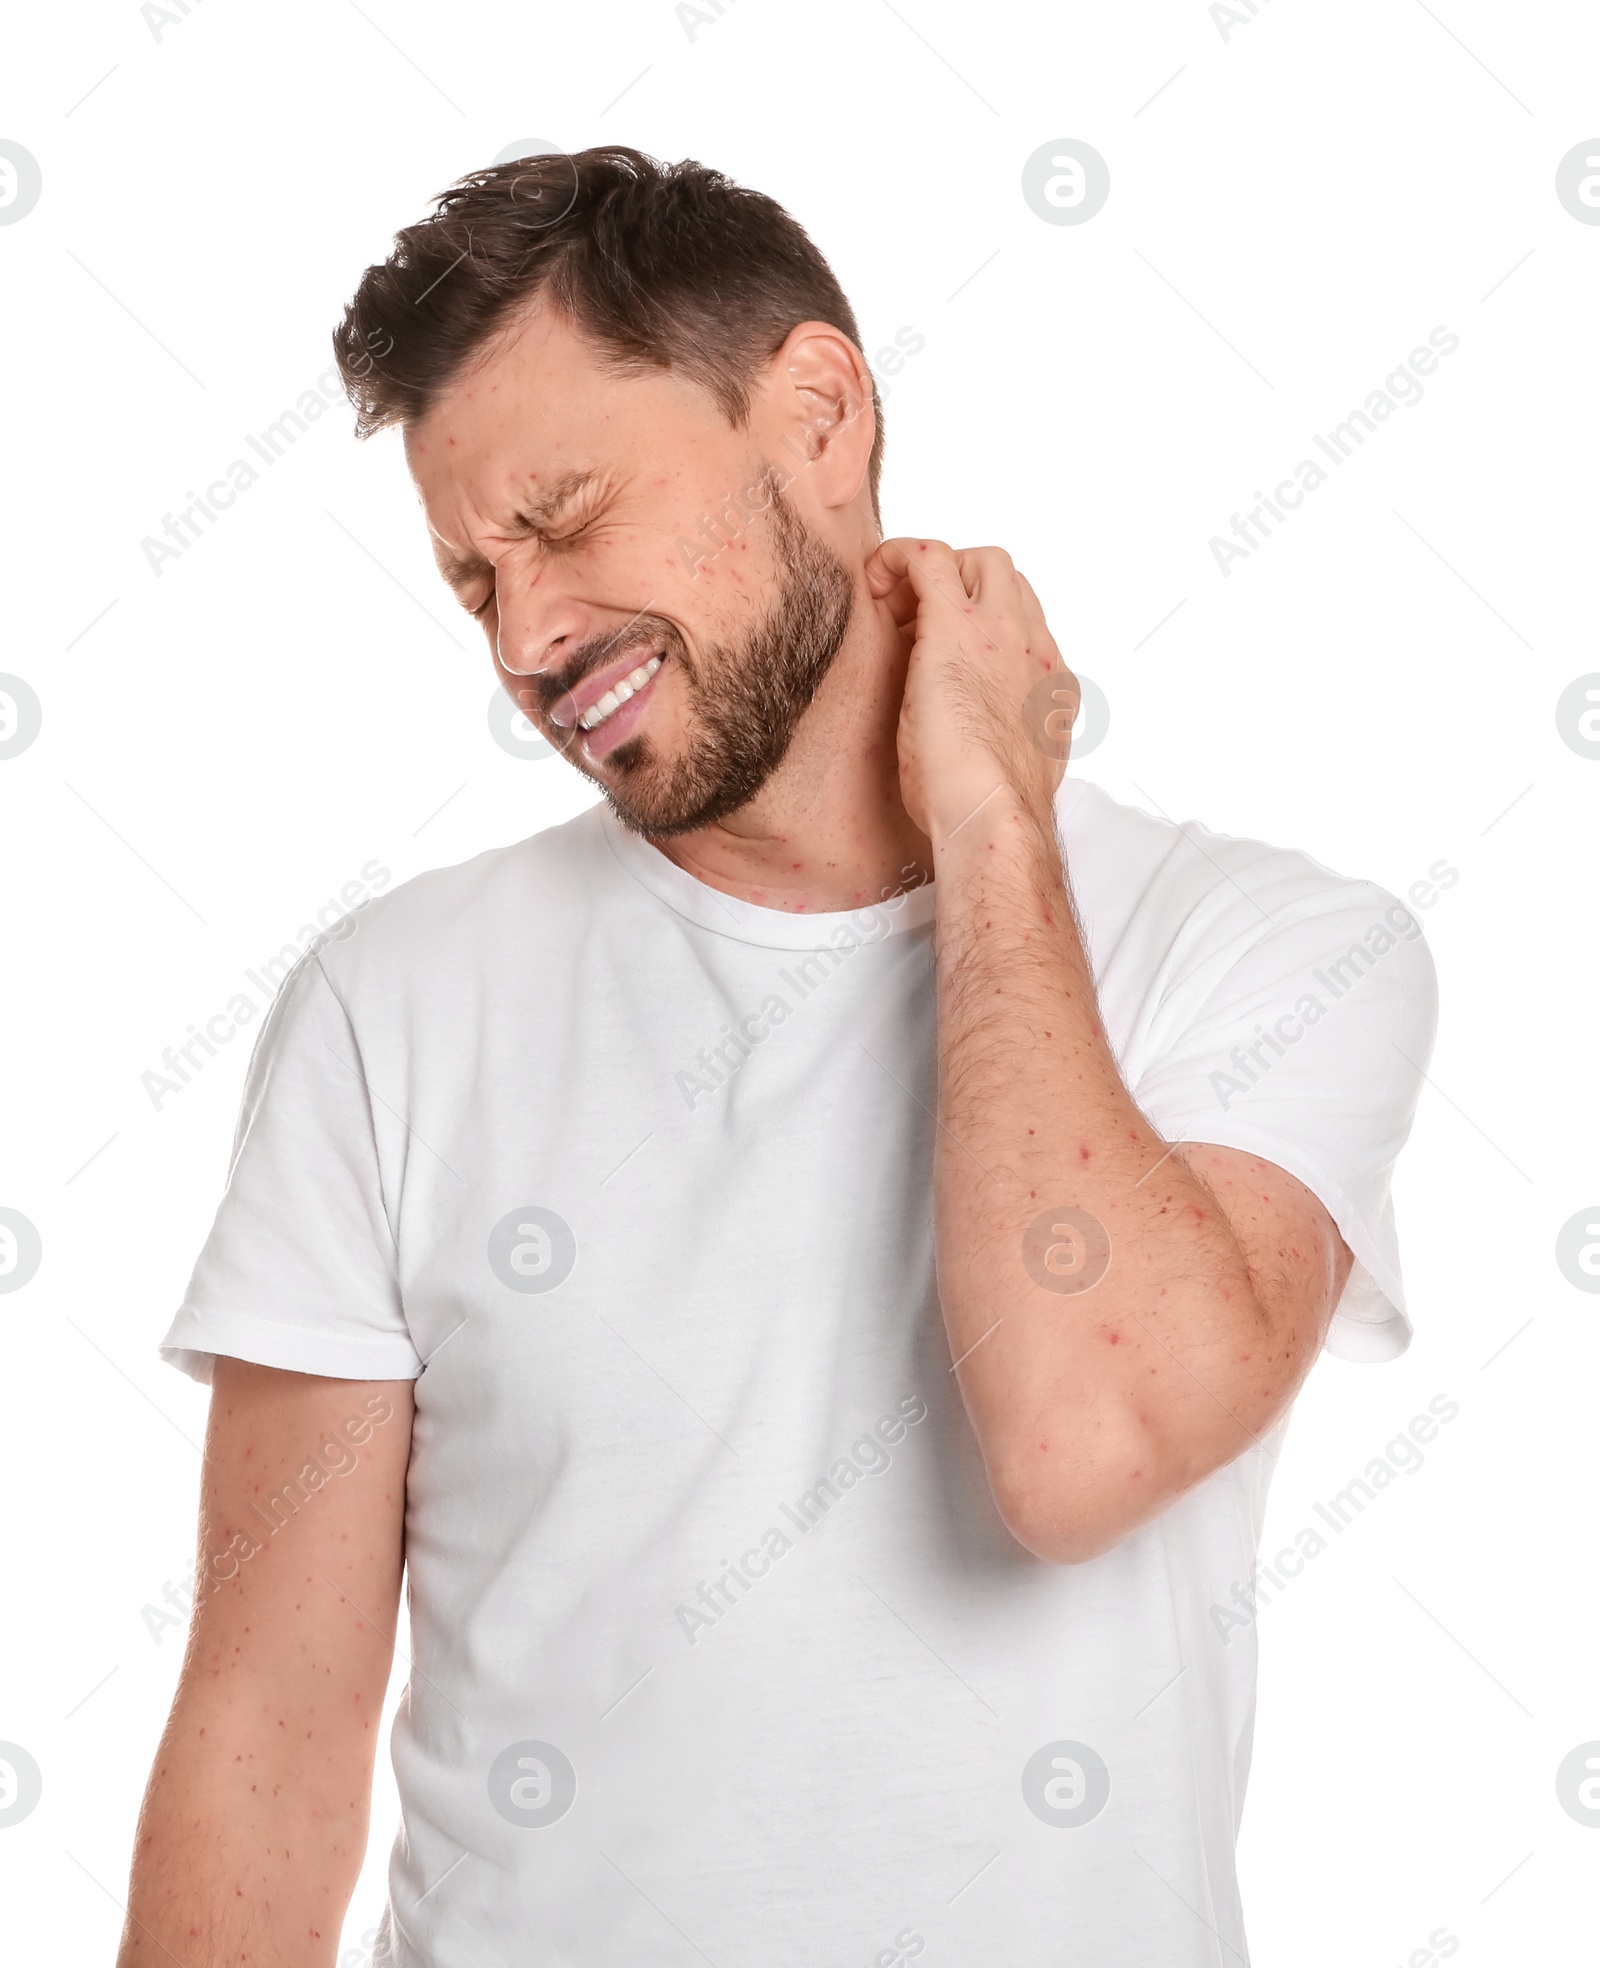 Photo of Man with rash suffering from monkeypox virus on white background